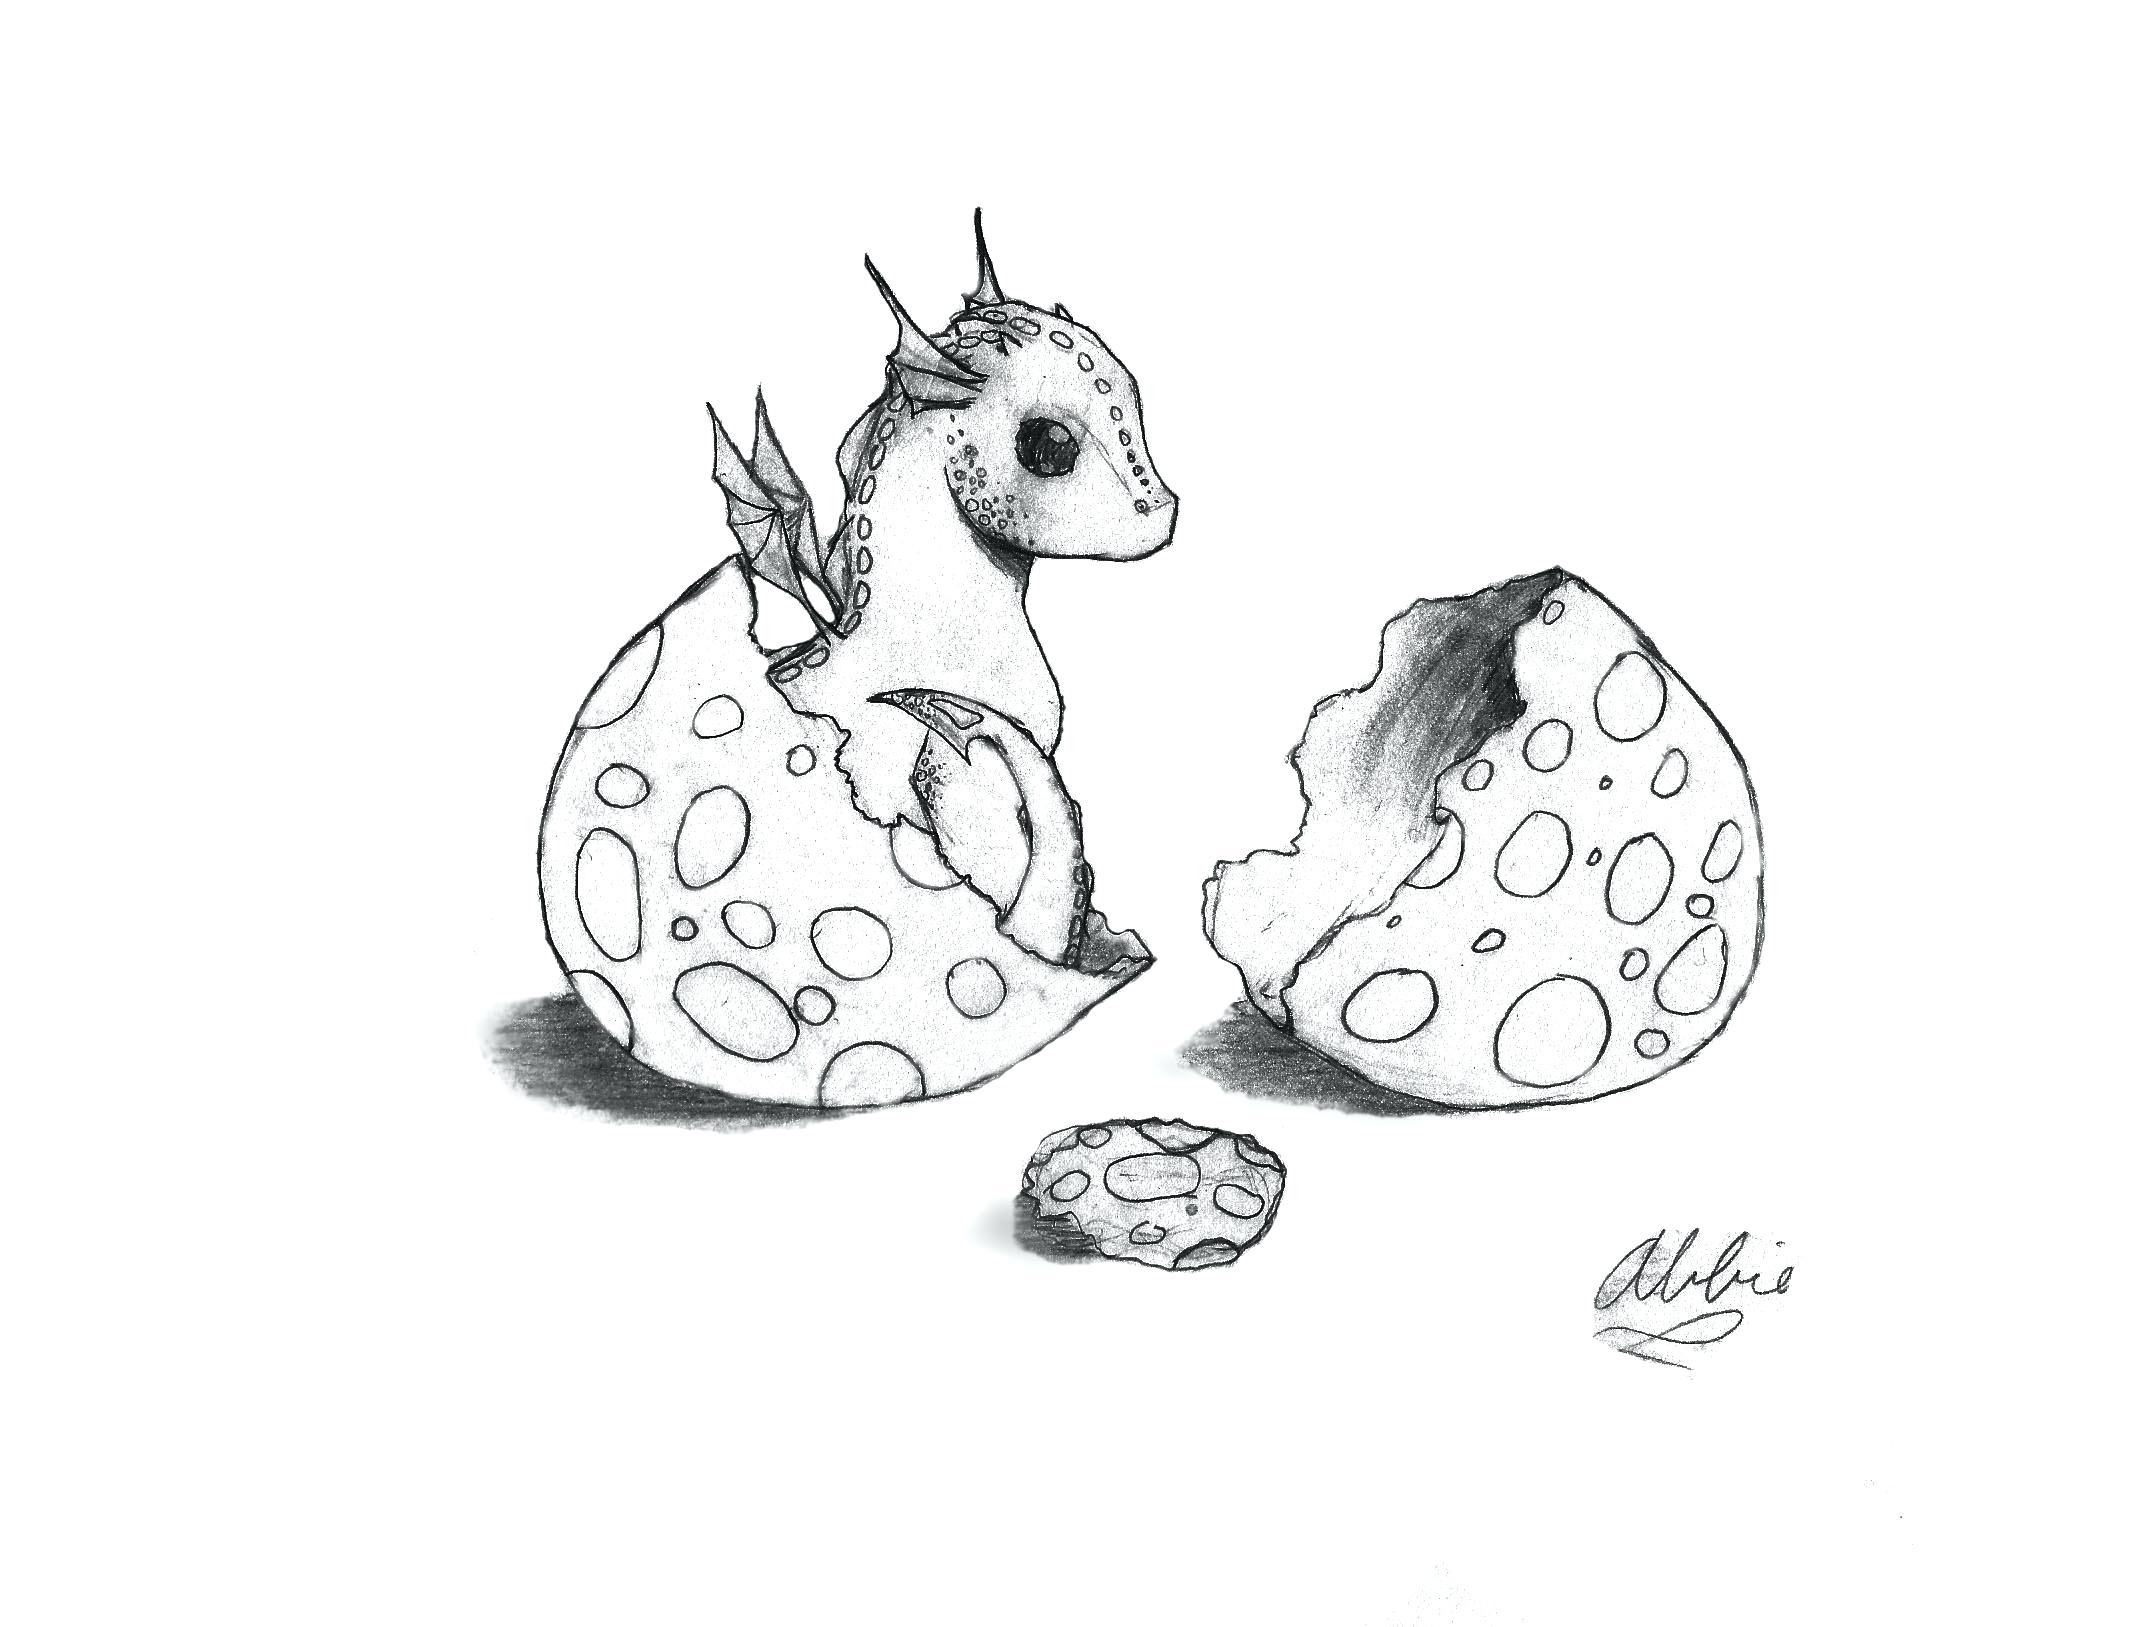 Dragon Egg Coloring Pages at GetDrawings | Free download